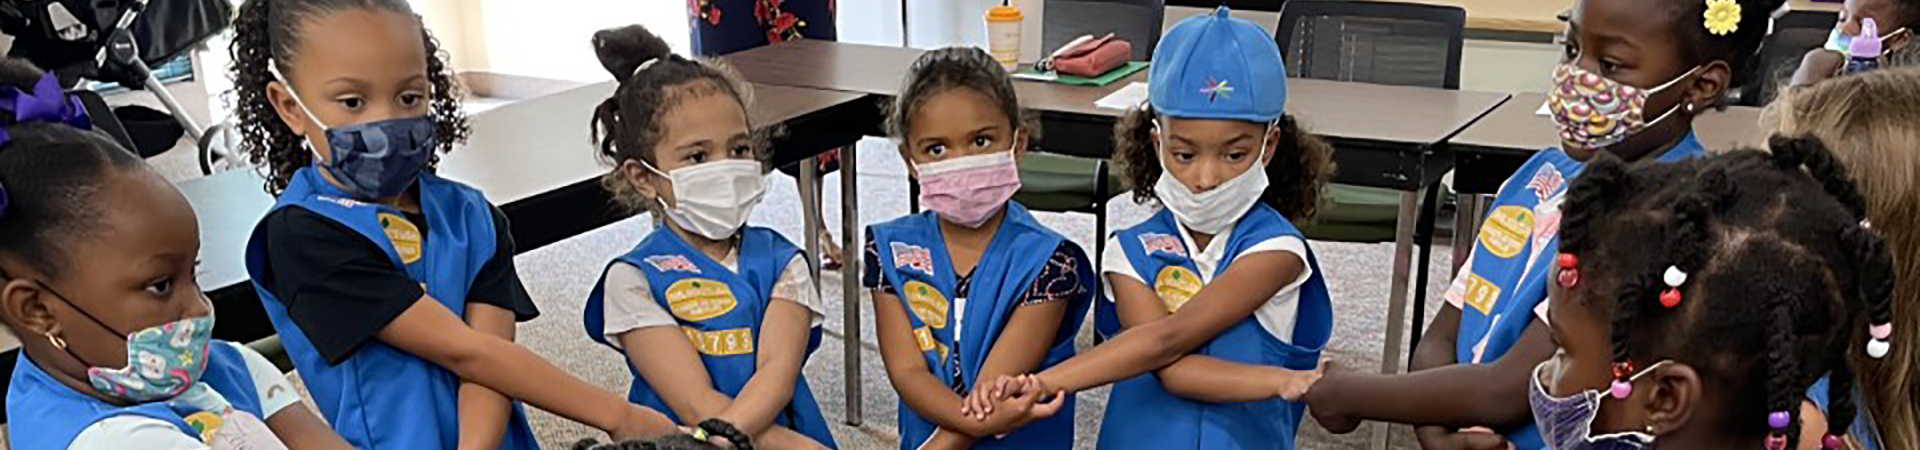  A group of Daisy Girl Scouts wearing masks while making the Girl Scout Friendship Circle 